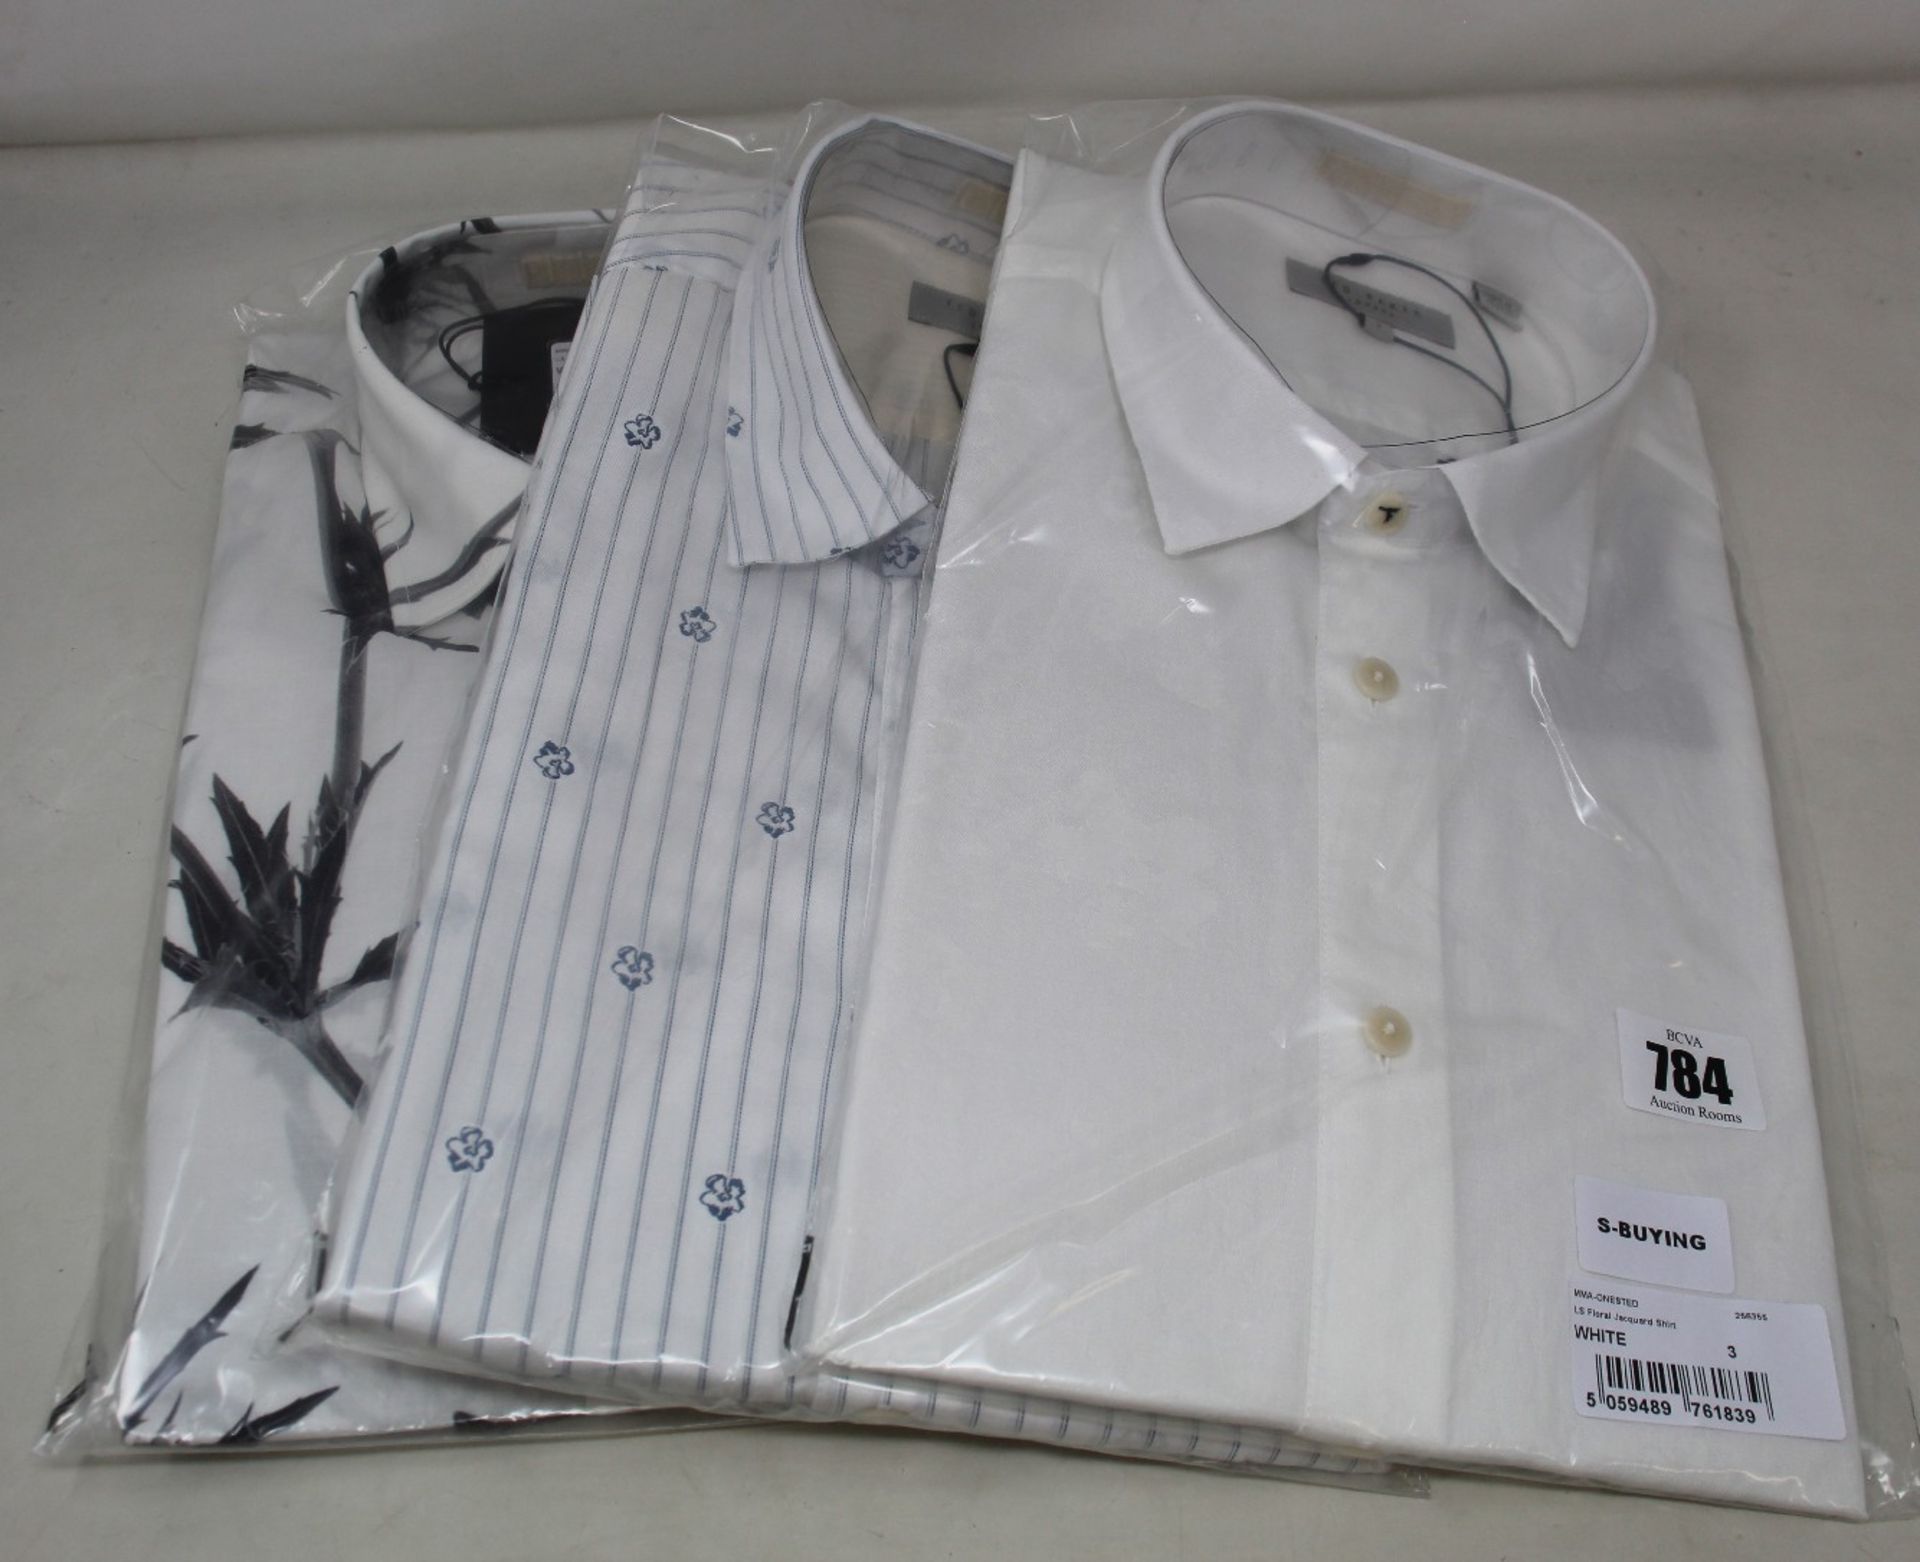 Three assorted as new Ted baker shirts (All size 3?).